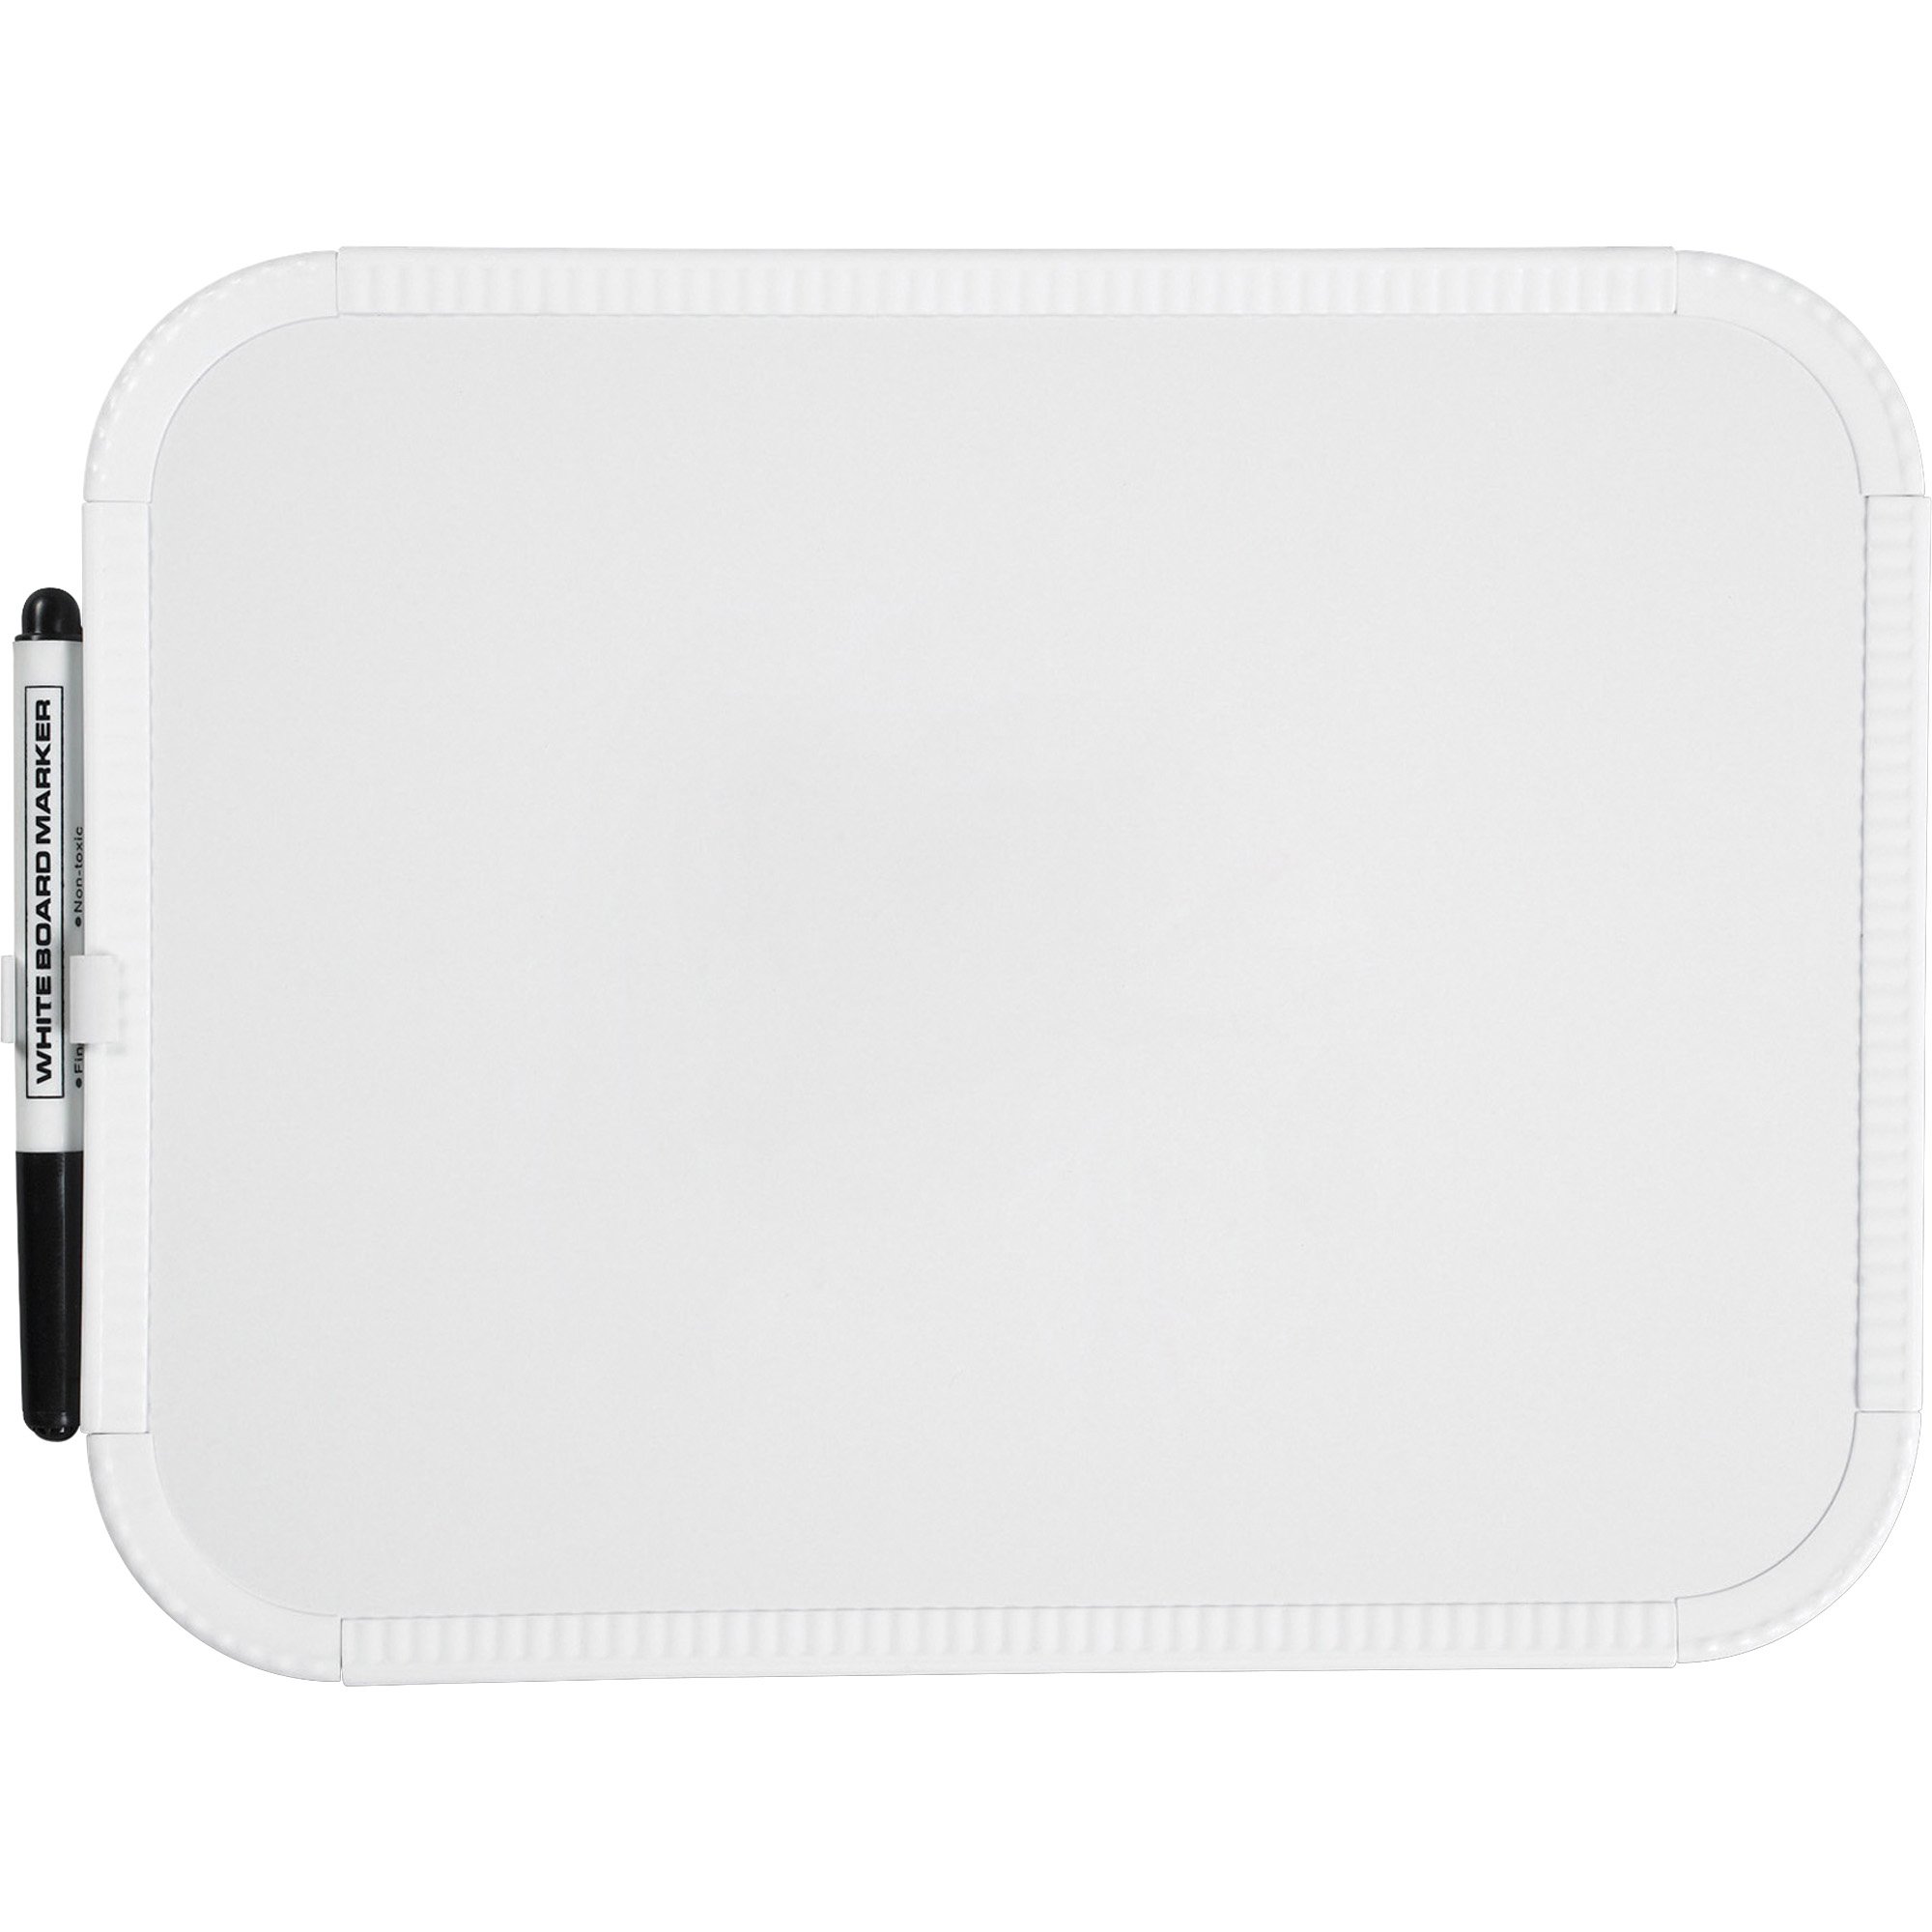 Sparco 75620 Dry-Erase Board, White, 8.5 x 11 Inch